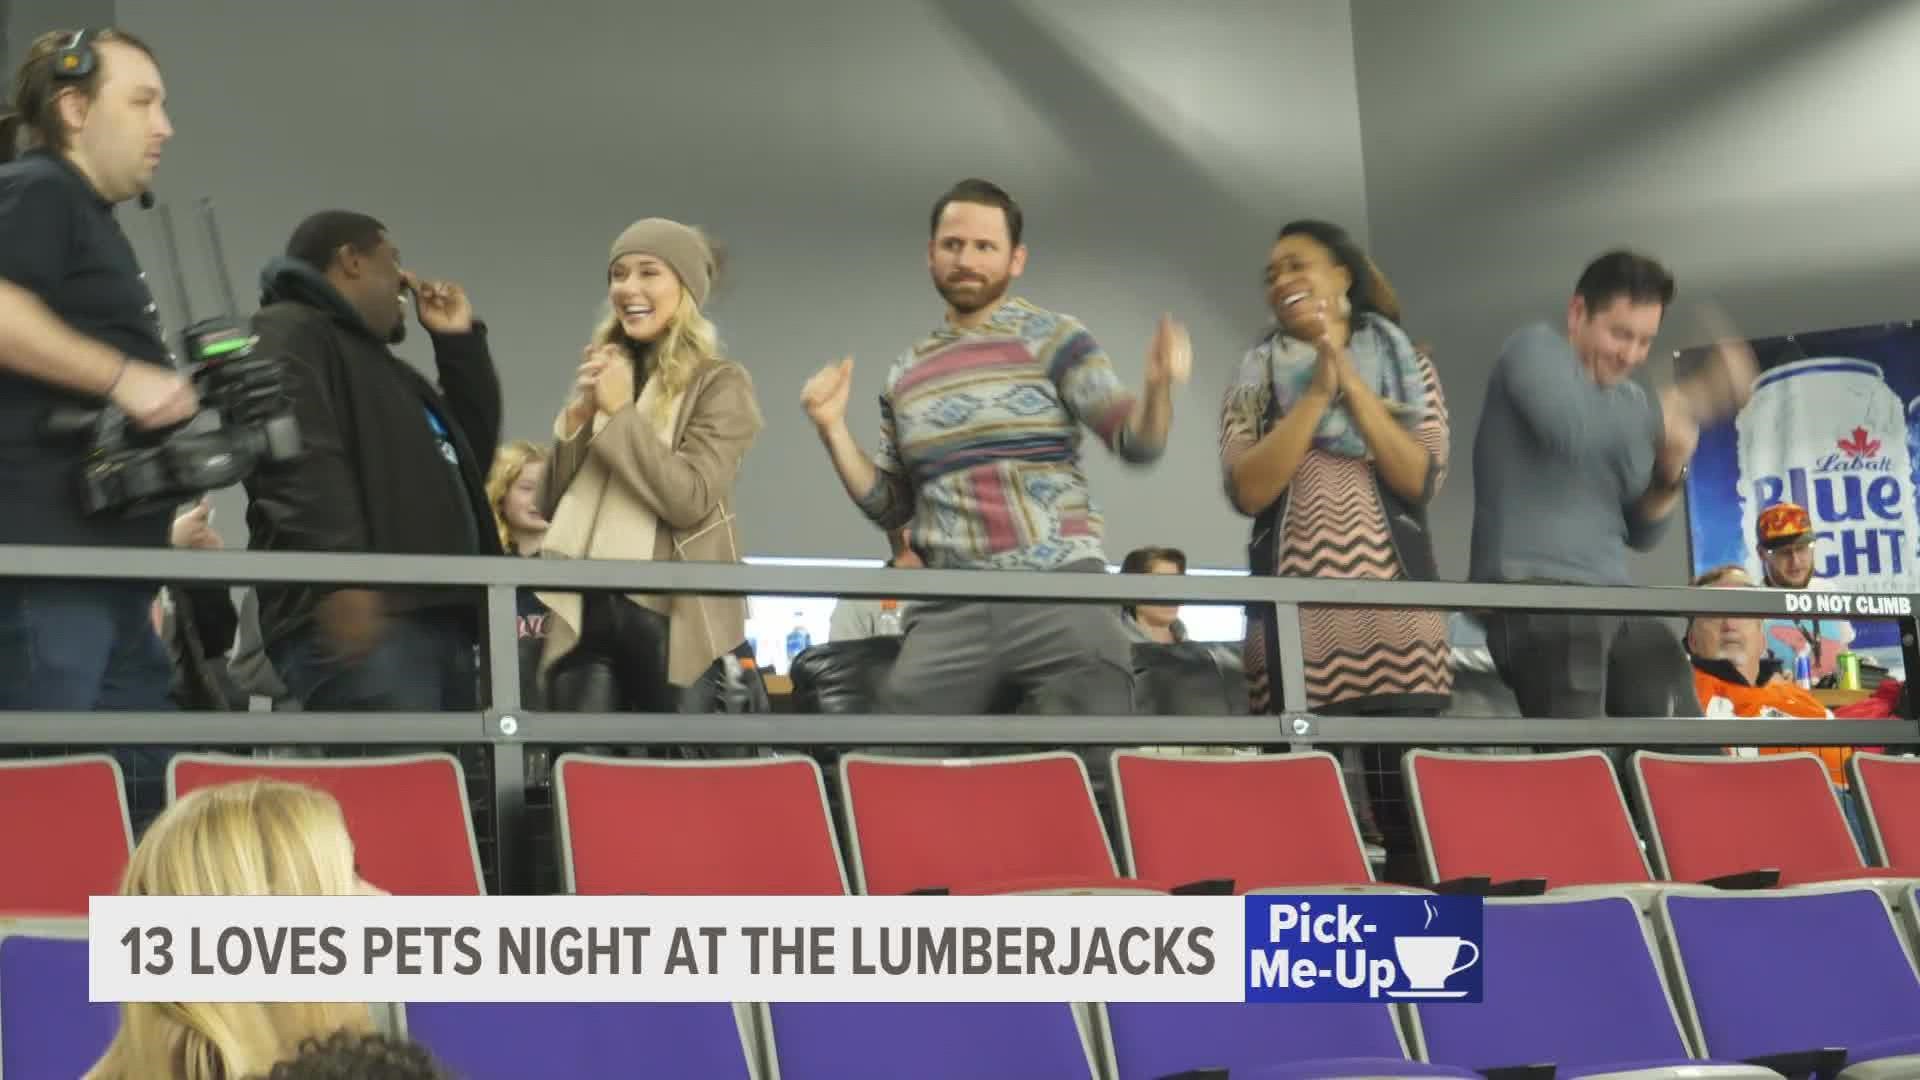 The 13 OYS team partnered with the Lumberjacks on Friday to have some fun and raise money for Pound Buddies in Muskegon.